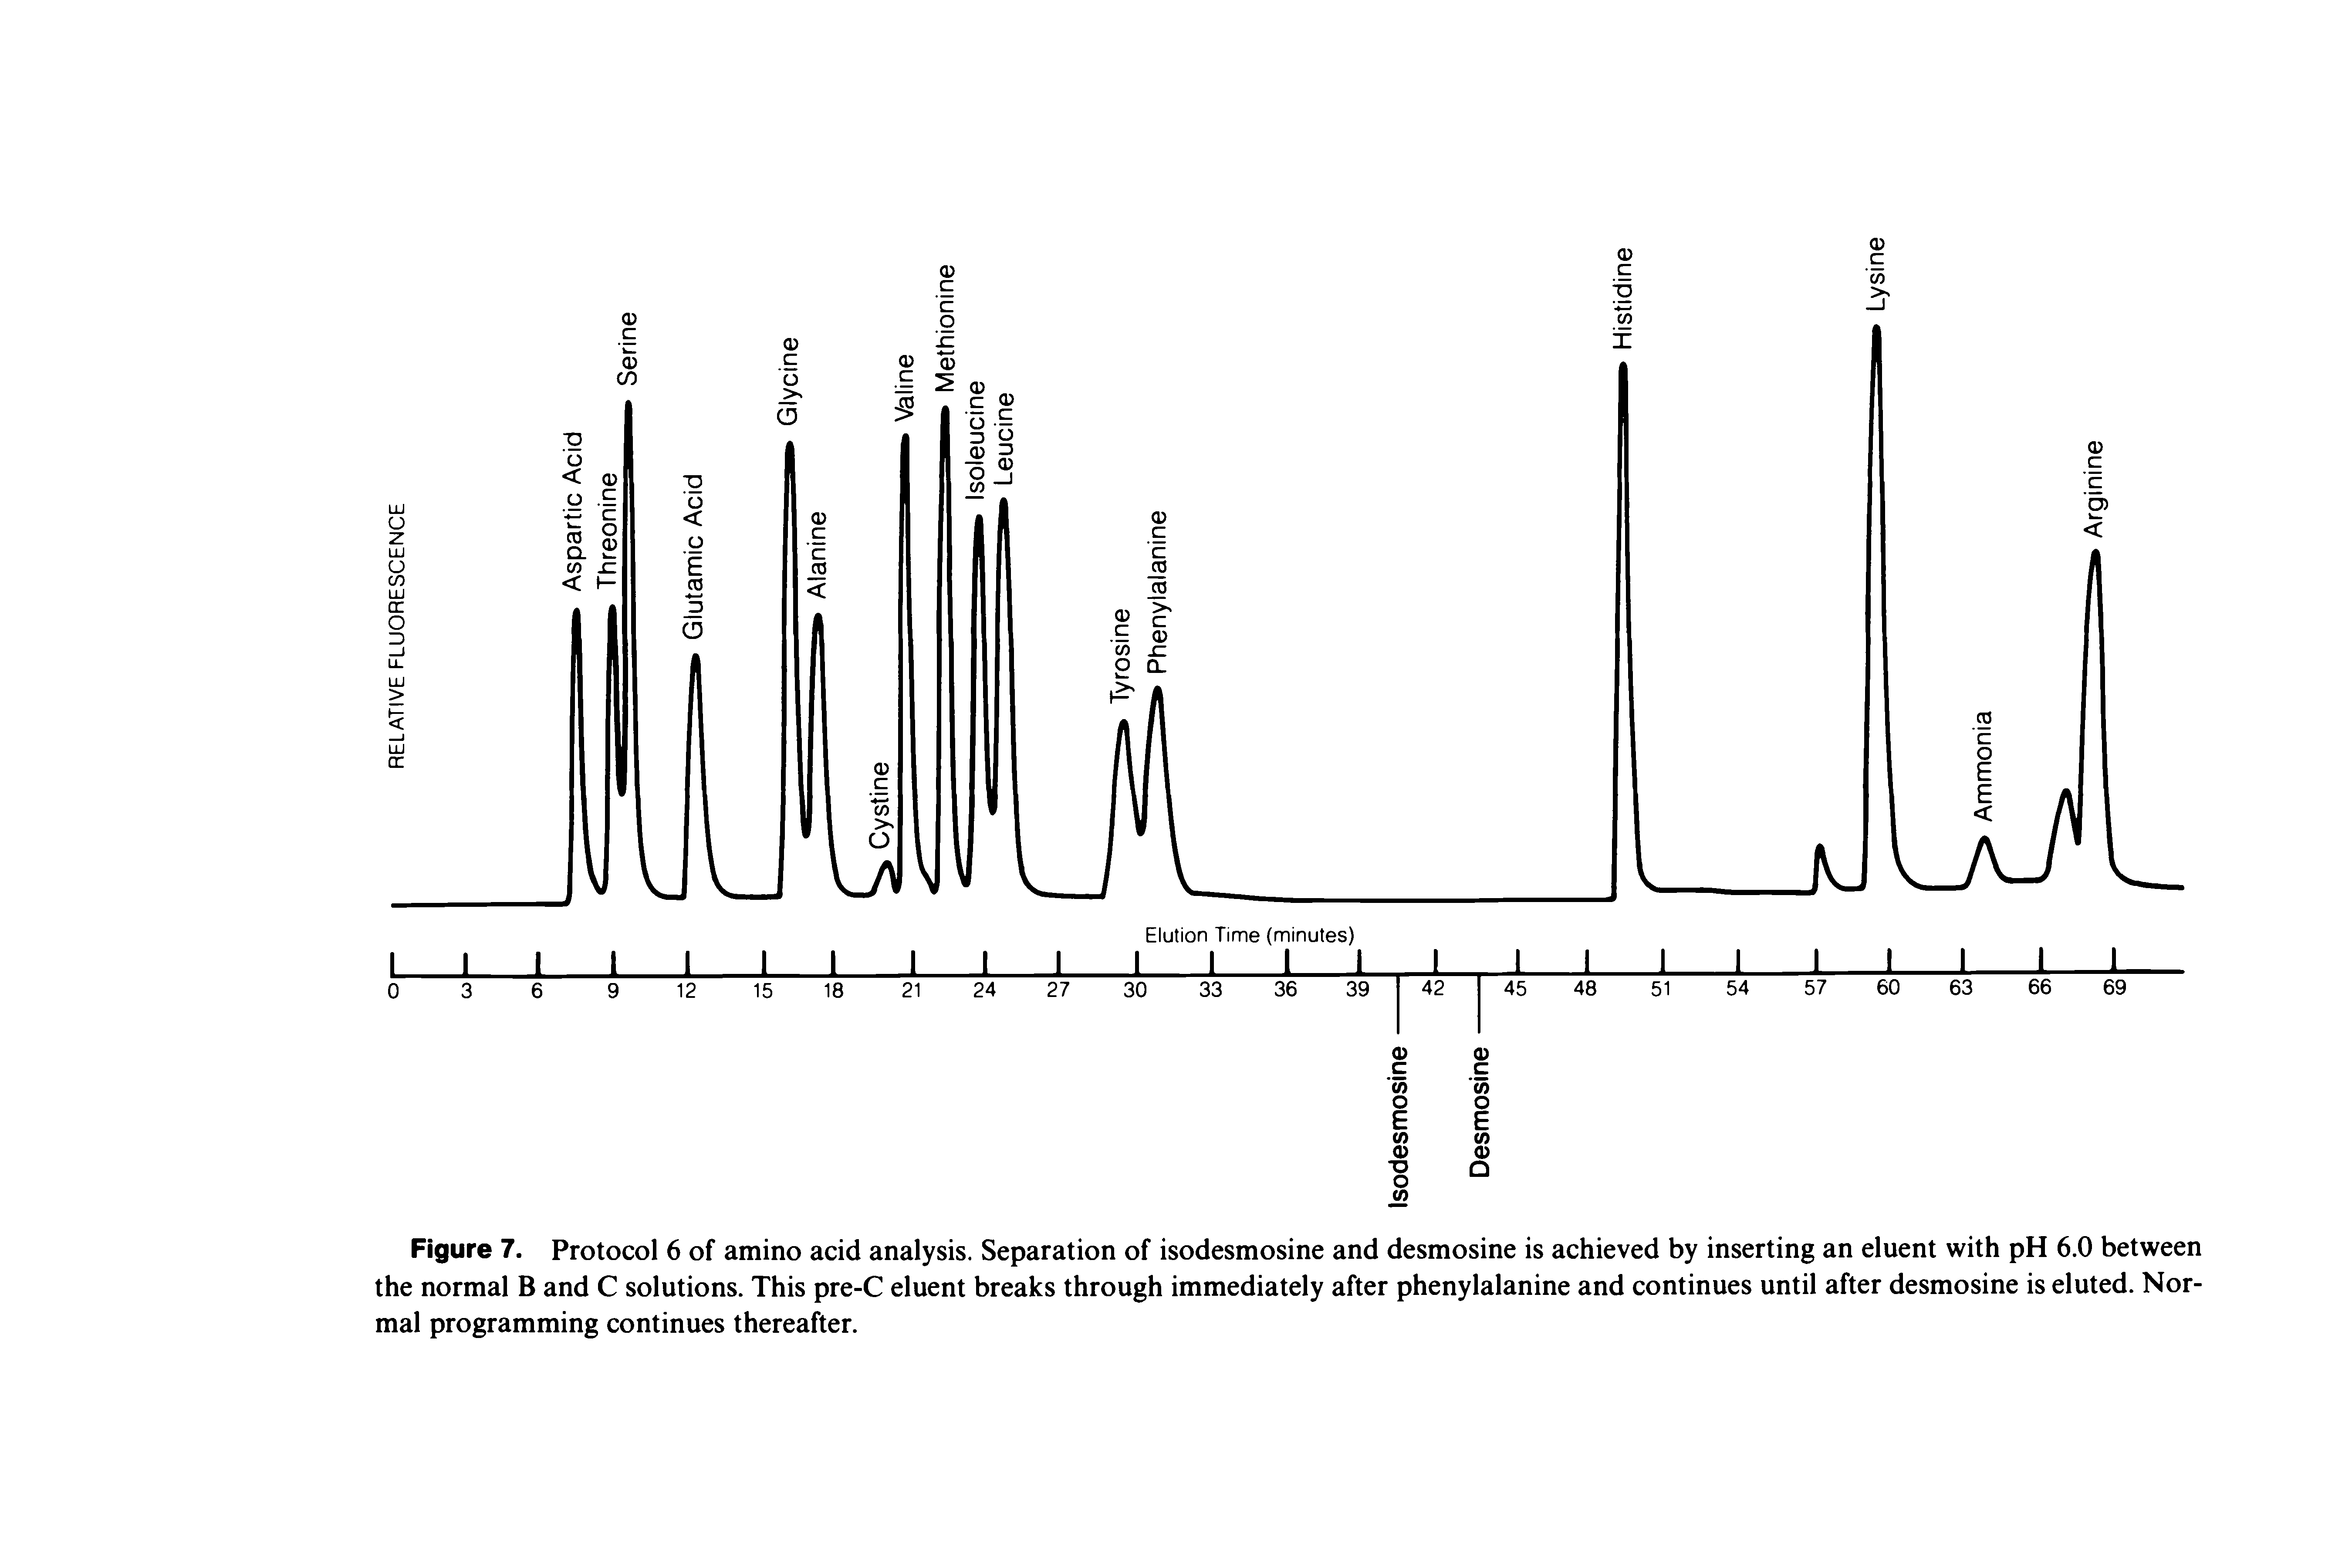 Figure 7. Protocol 6 of amino acid analysis. Separation of isodesmosine and desmosine is achieved by inserting an eluent with pH 6.0 between the normal B and C solutions. This pre-C eluent breaks through immediately after phenylalanine and continues until after desmosine is eluted. Normal programming continues thereafter.